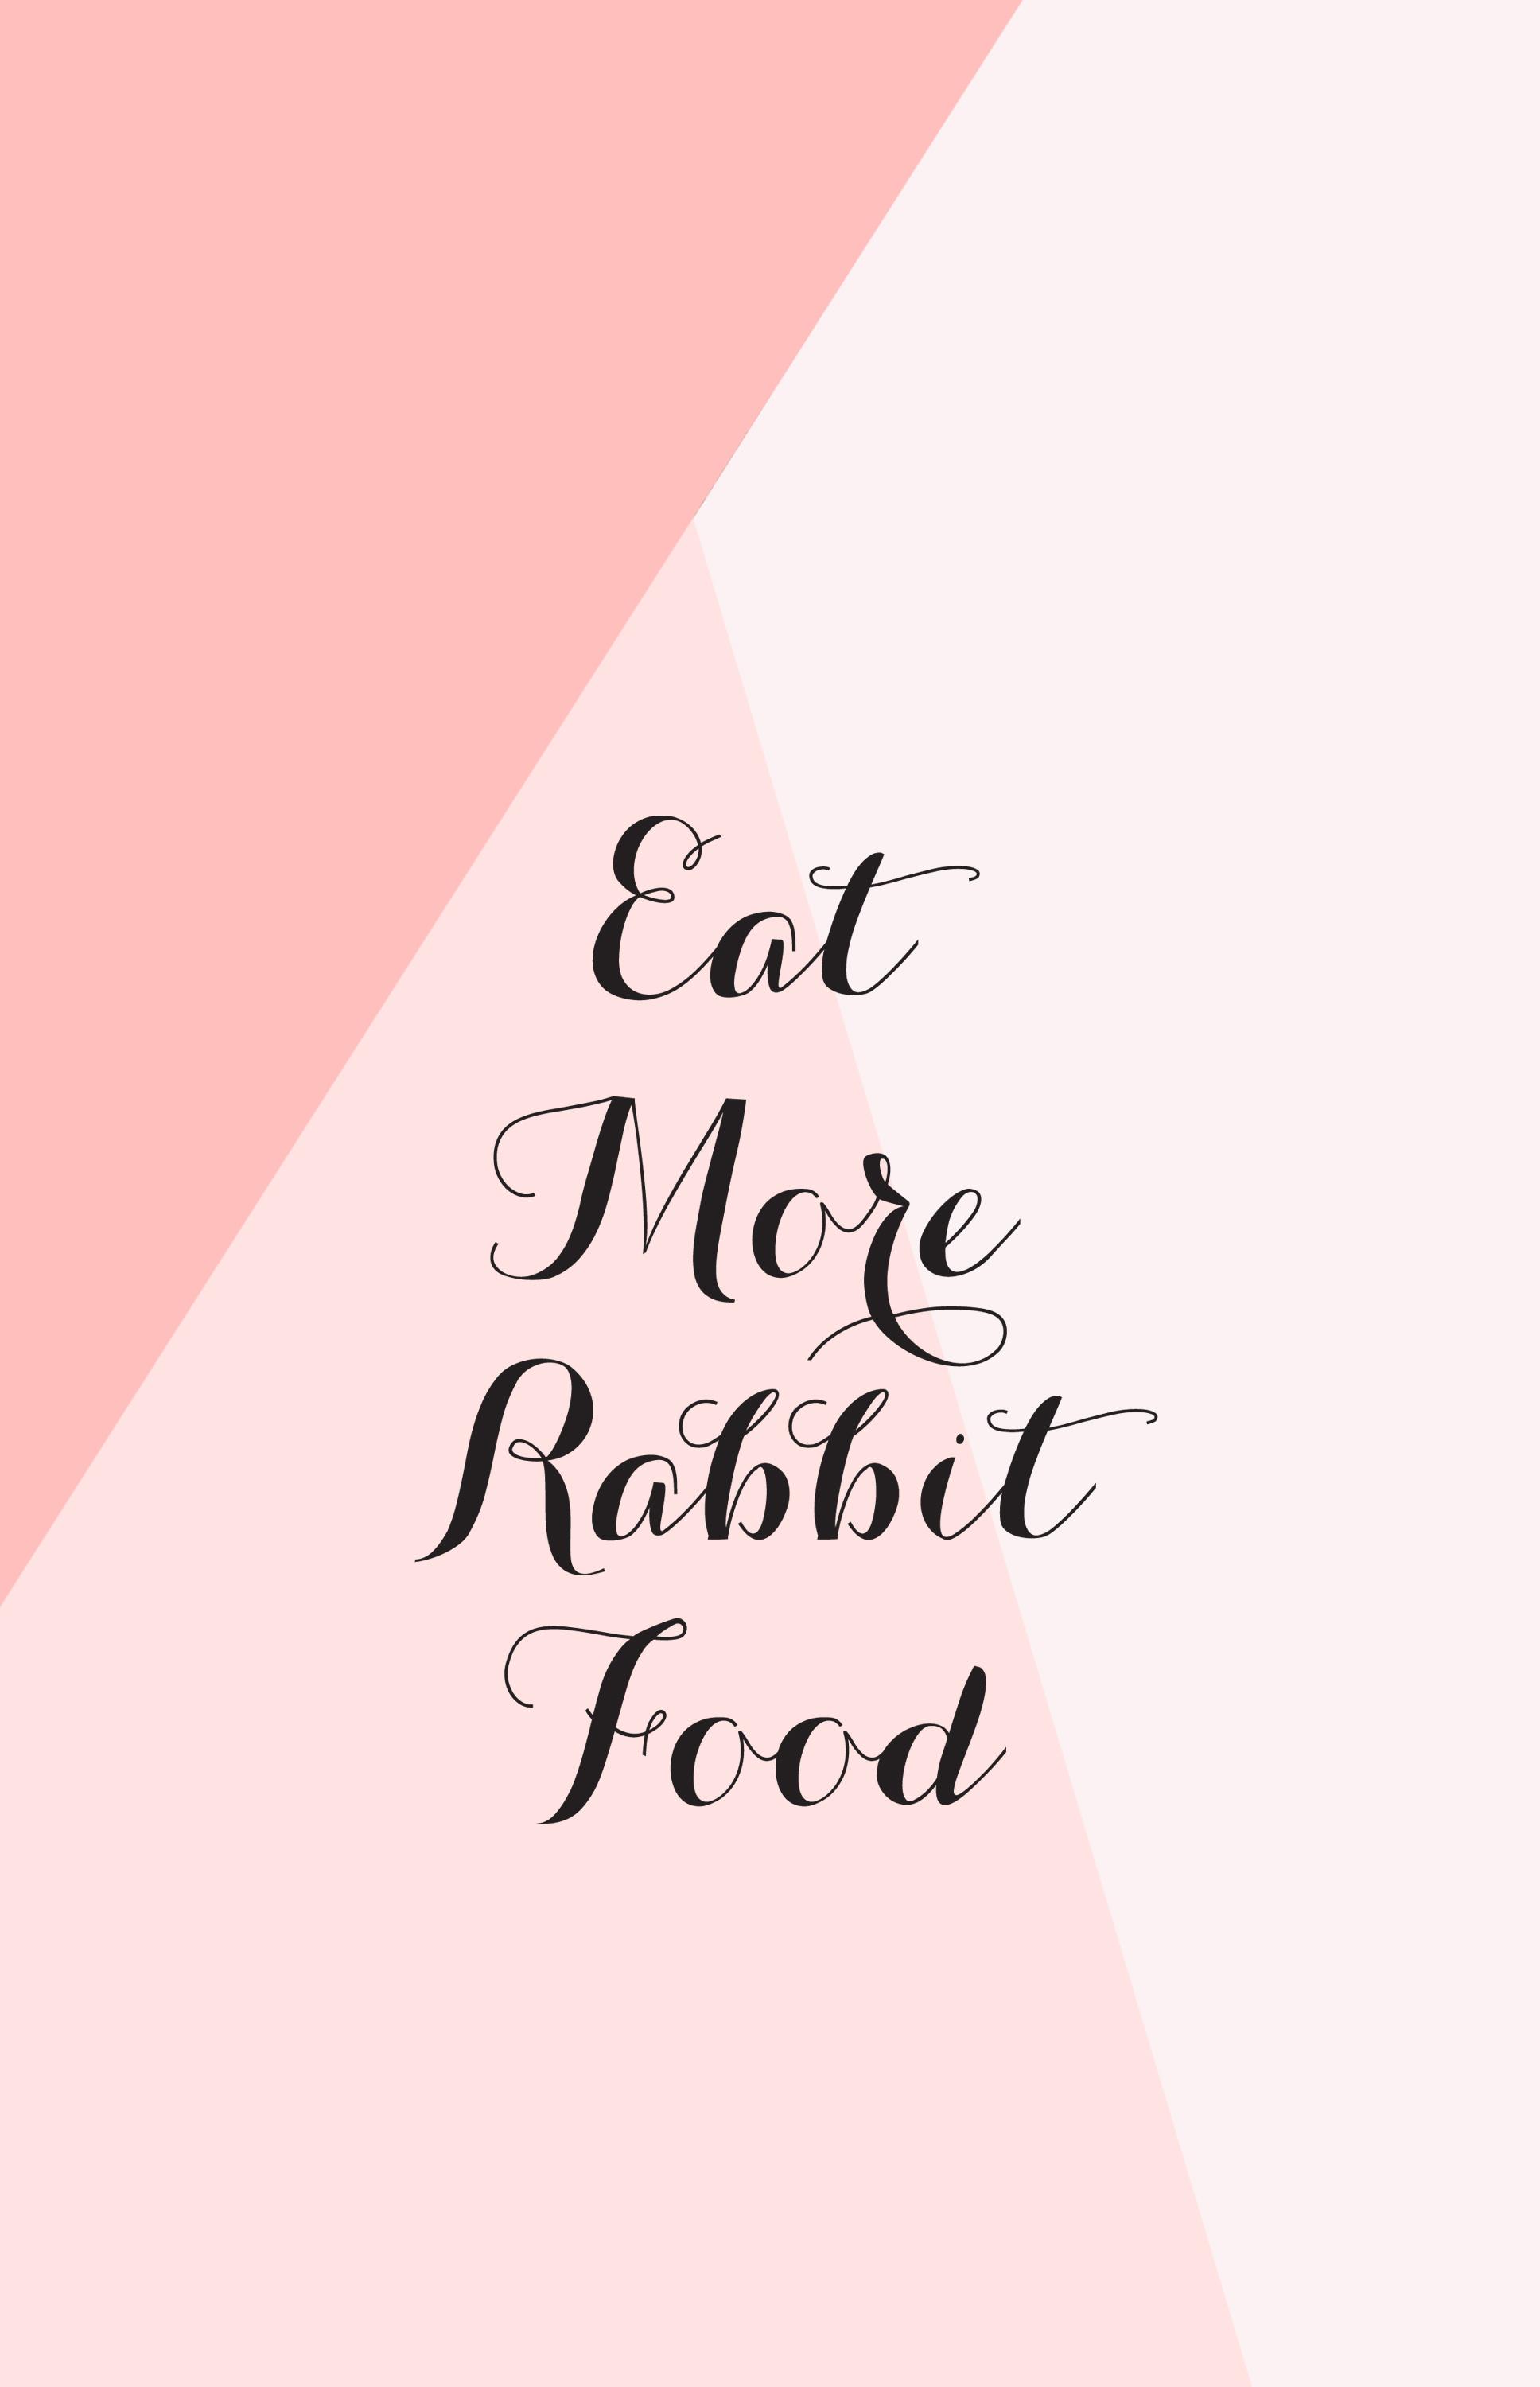 Eat More Rabbit Food Archives Food For My Bunny Teeth